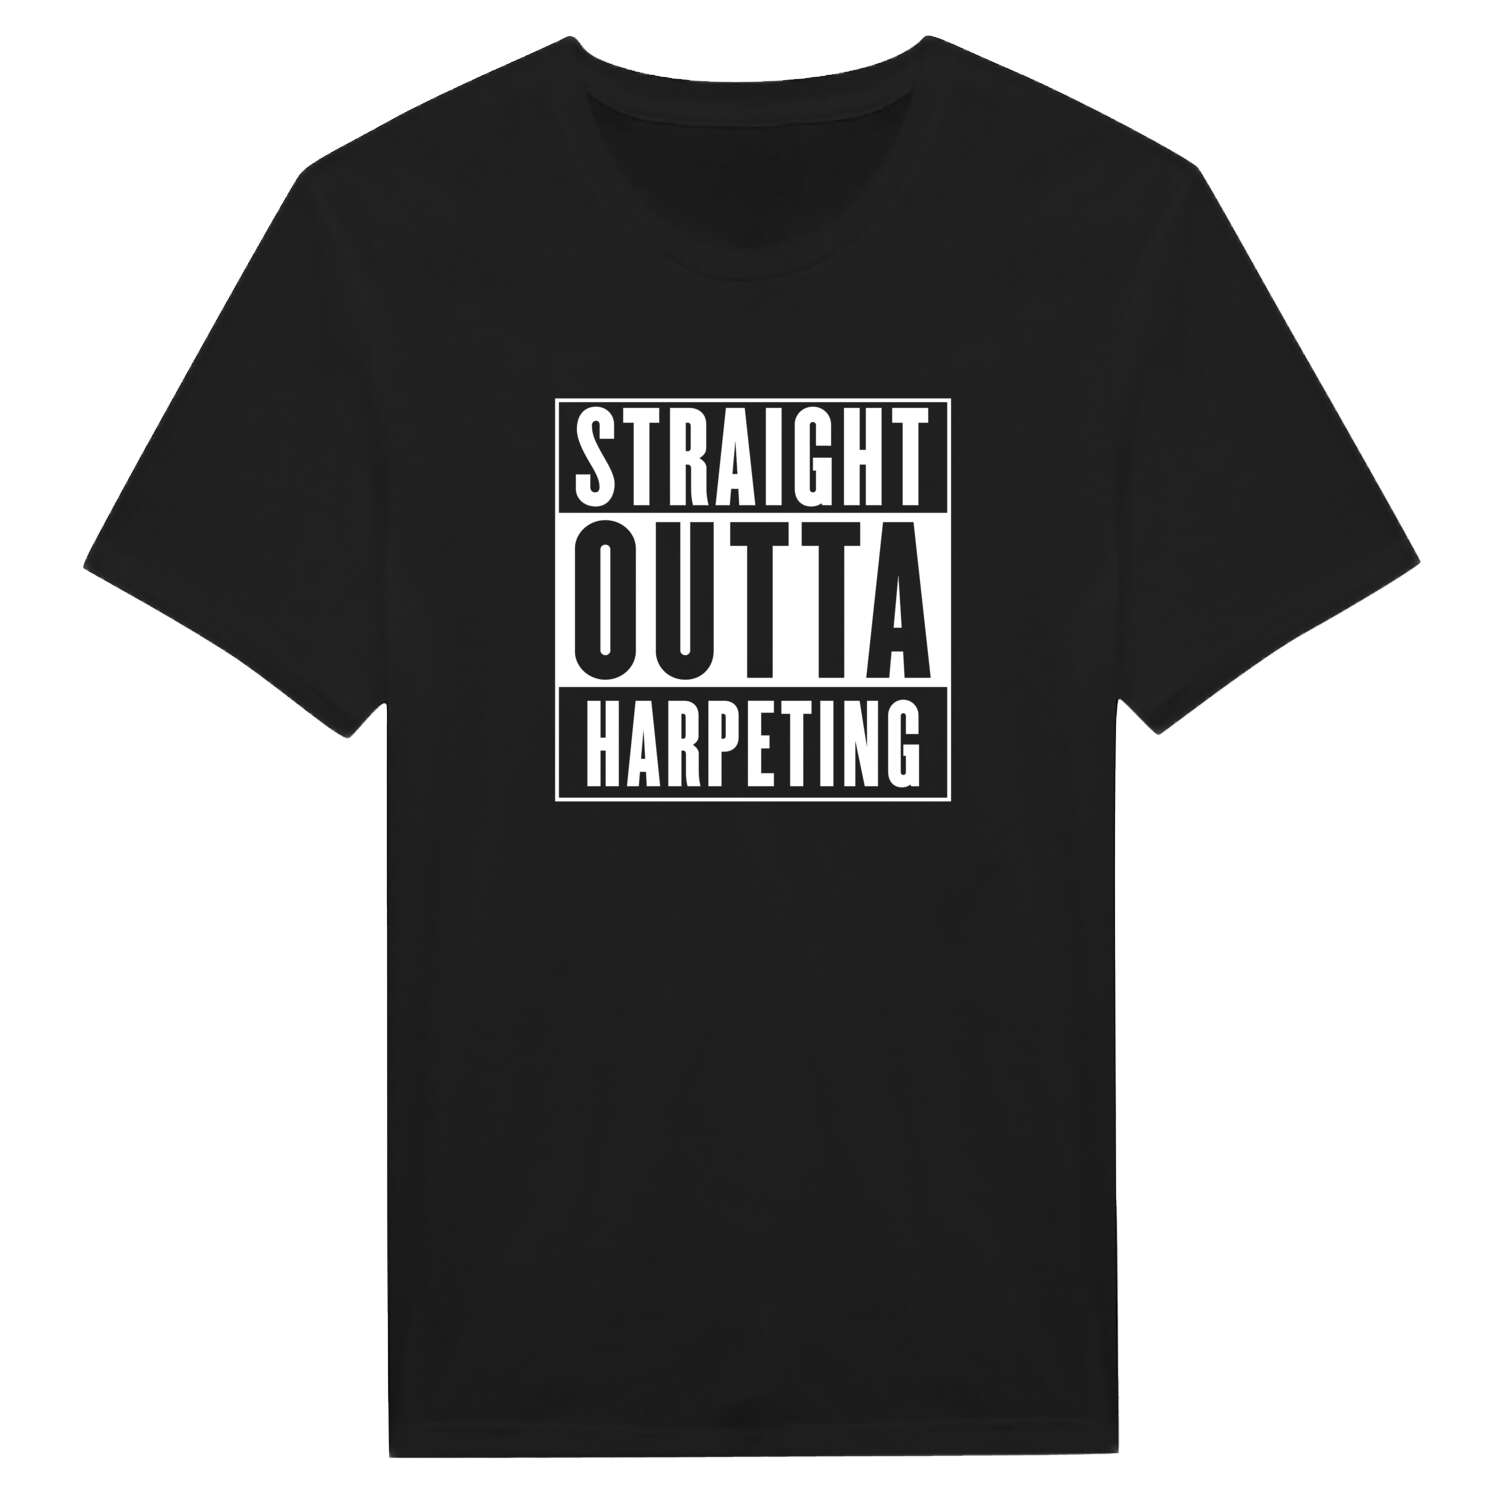 Harpeting T-Shirt »Straight Outta«